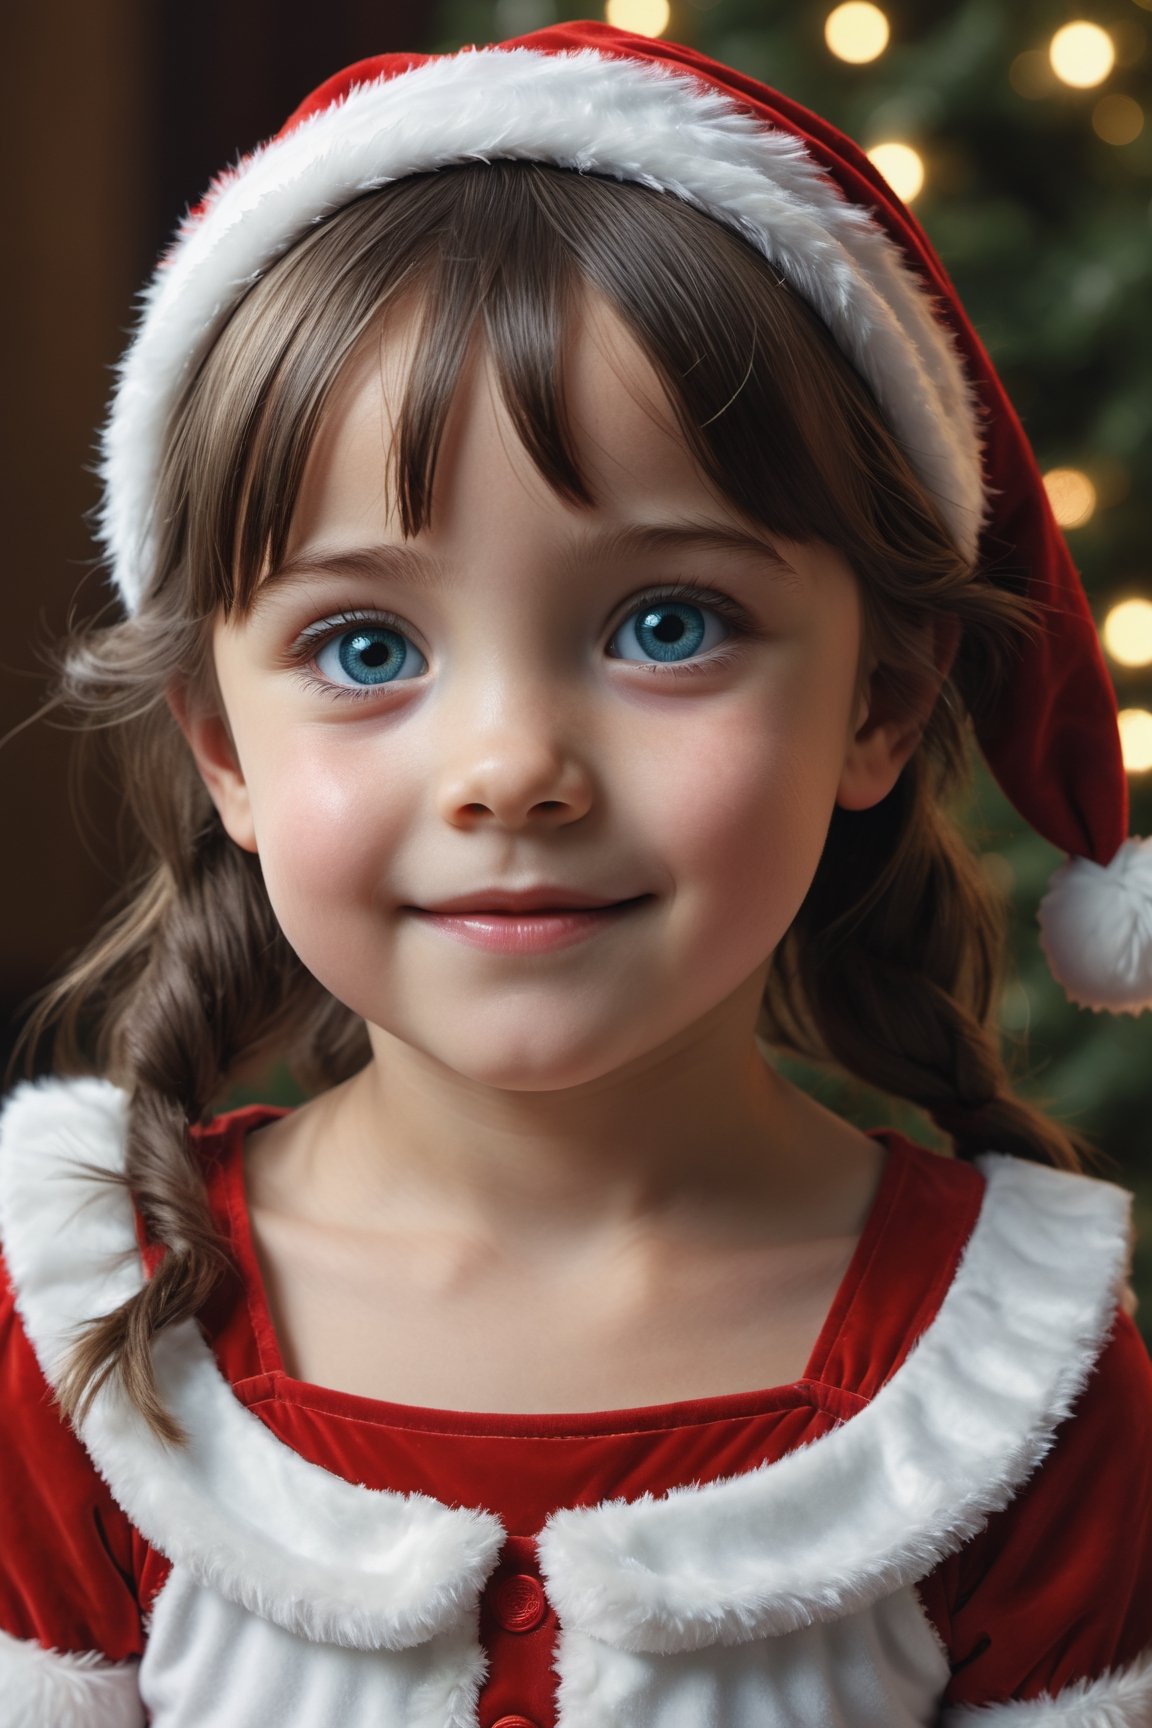 ((9 year old girl:1.5)), ((Portrait)),1 girl, small, bangs,((dark brown hair:1.3)), (aquamarine eyes ), smile, detailed face, beautiful eyes, natural light, (( realism: 1.2)), cinematic lighting, perfect composition, ultra detailed, masterpiece, (best quality: 1.3), reflections, cg unity 8k wallpaper extremely detailed, detailed background, masterpiece, best quality, (masterpiece), (best quality: 1.4), (ultra high resolution: 1.2), (hyperrealistic: 1.4), (photorealistic: 1.2), best quality, high quality, high resolution, ((Santa Claus costume: 1.4)),((eyebrows thick: 1.1)), ((Christmas decorations)), perfect light